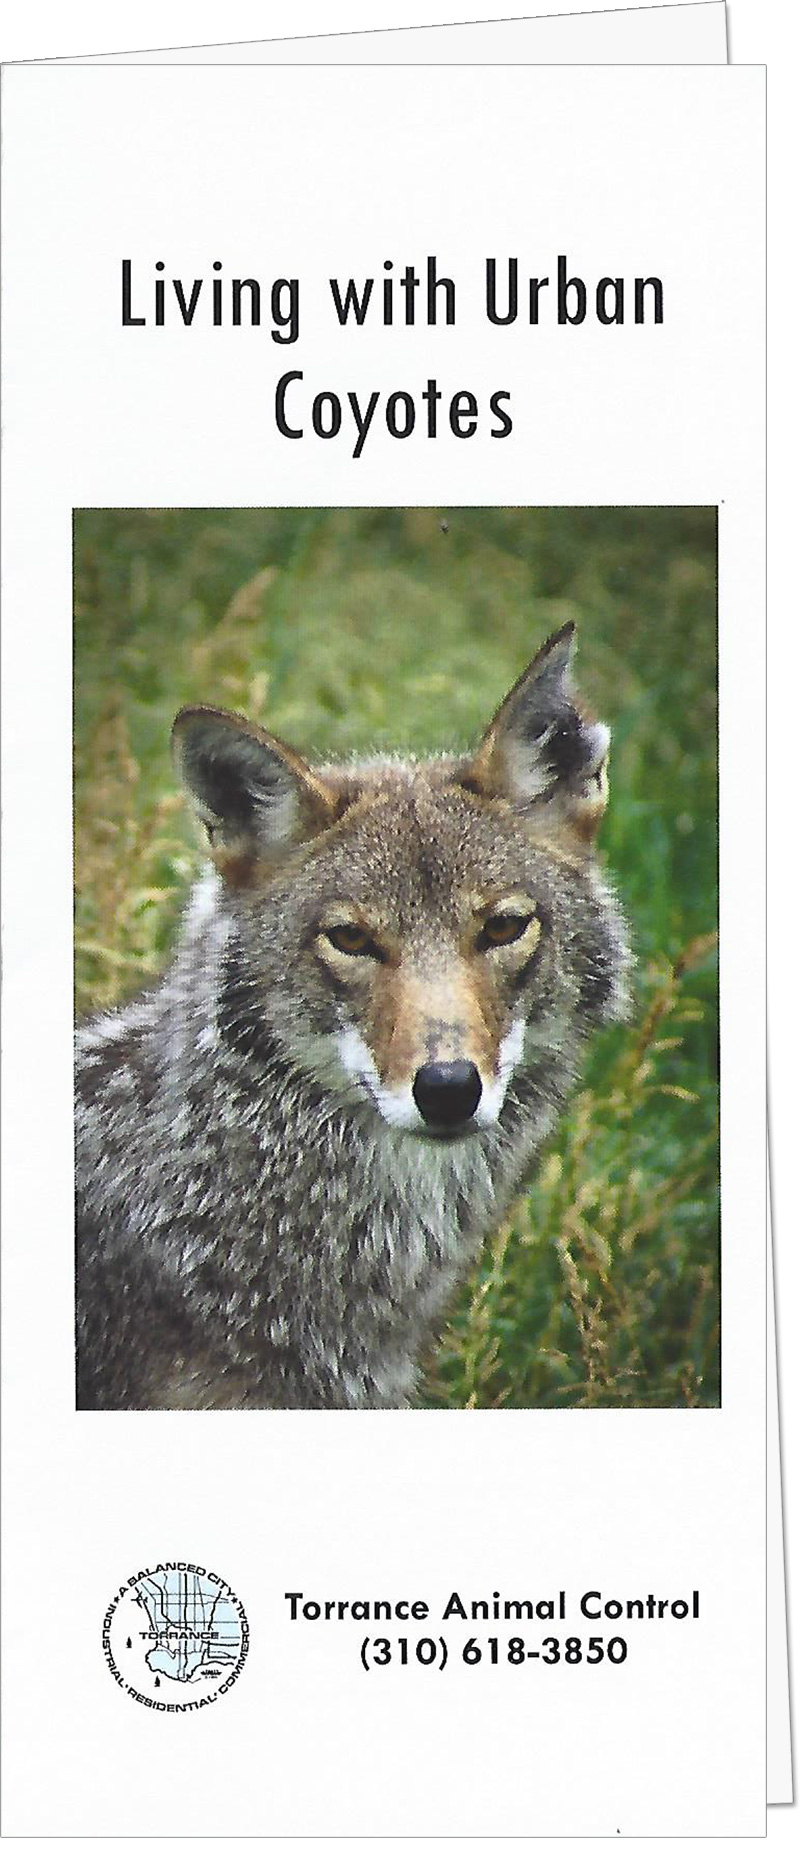 Urban Coyote Guide by Torrance Animal Control